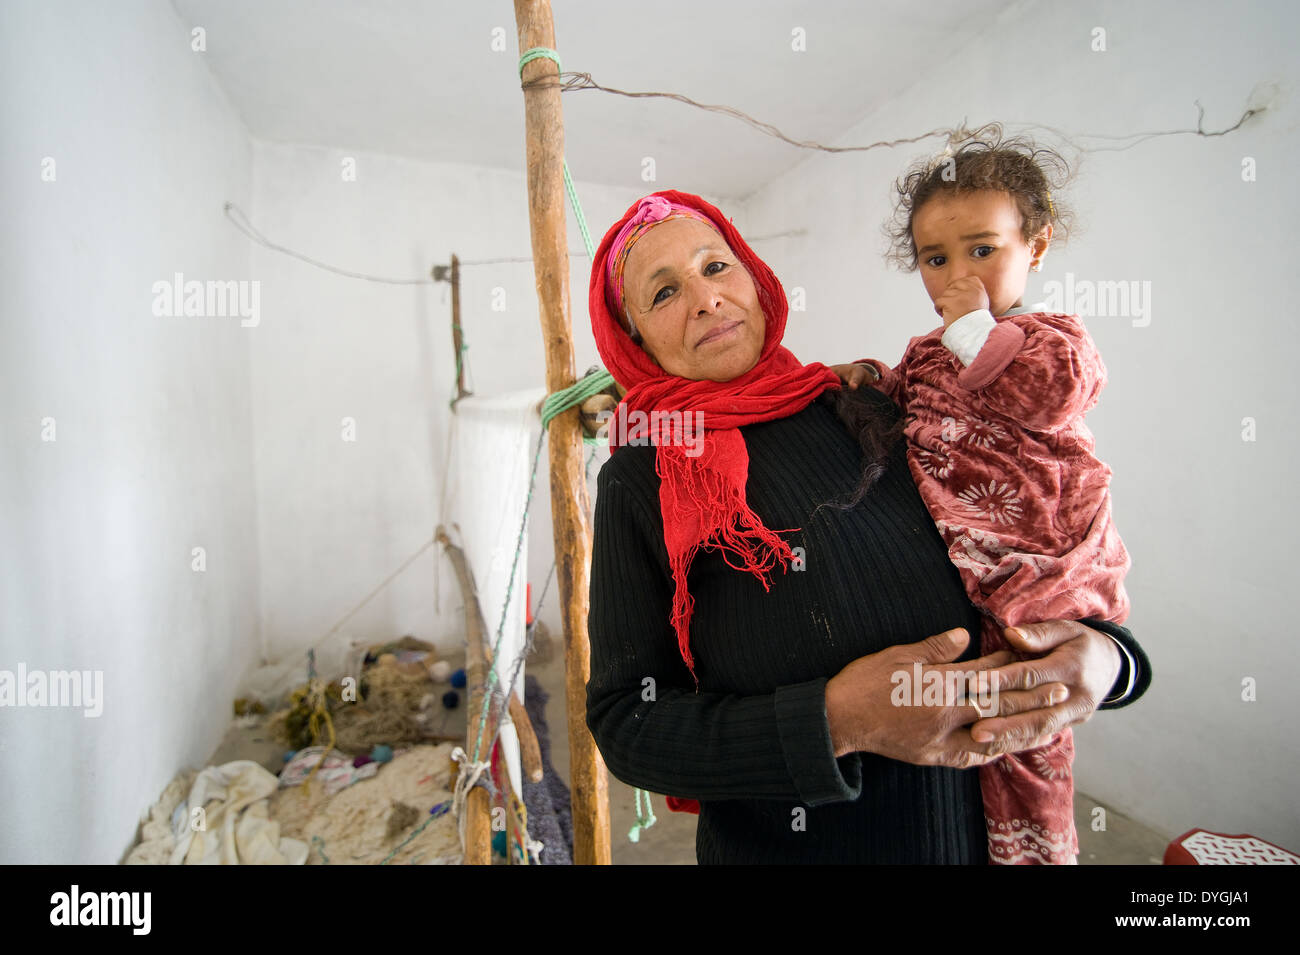 TUNISIA, KASSERINE: Life in villages around Kasserine is traditional, rural and often poor without even running water. Stock Photo